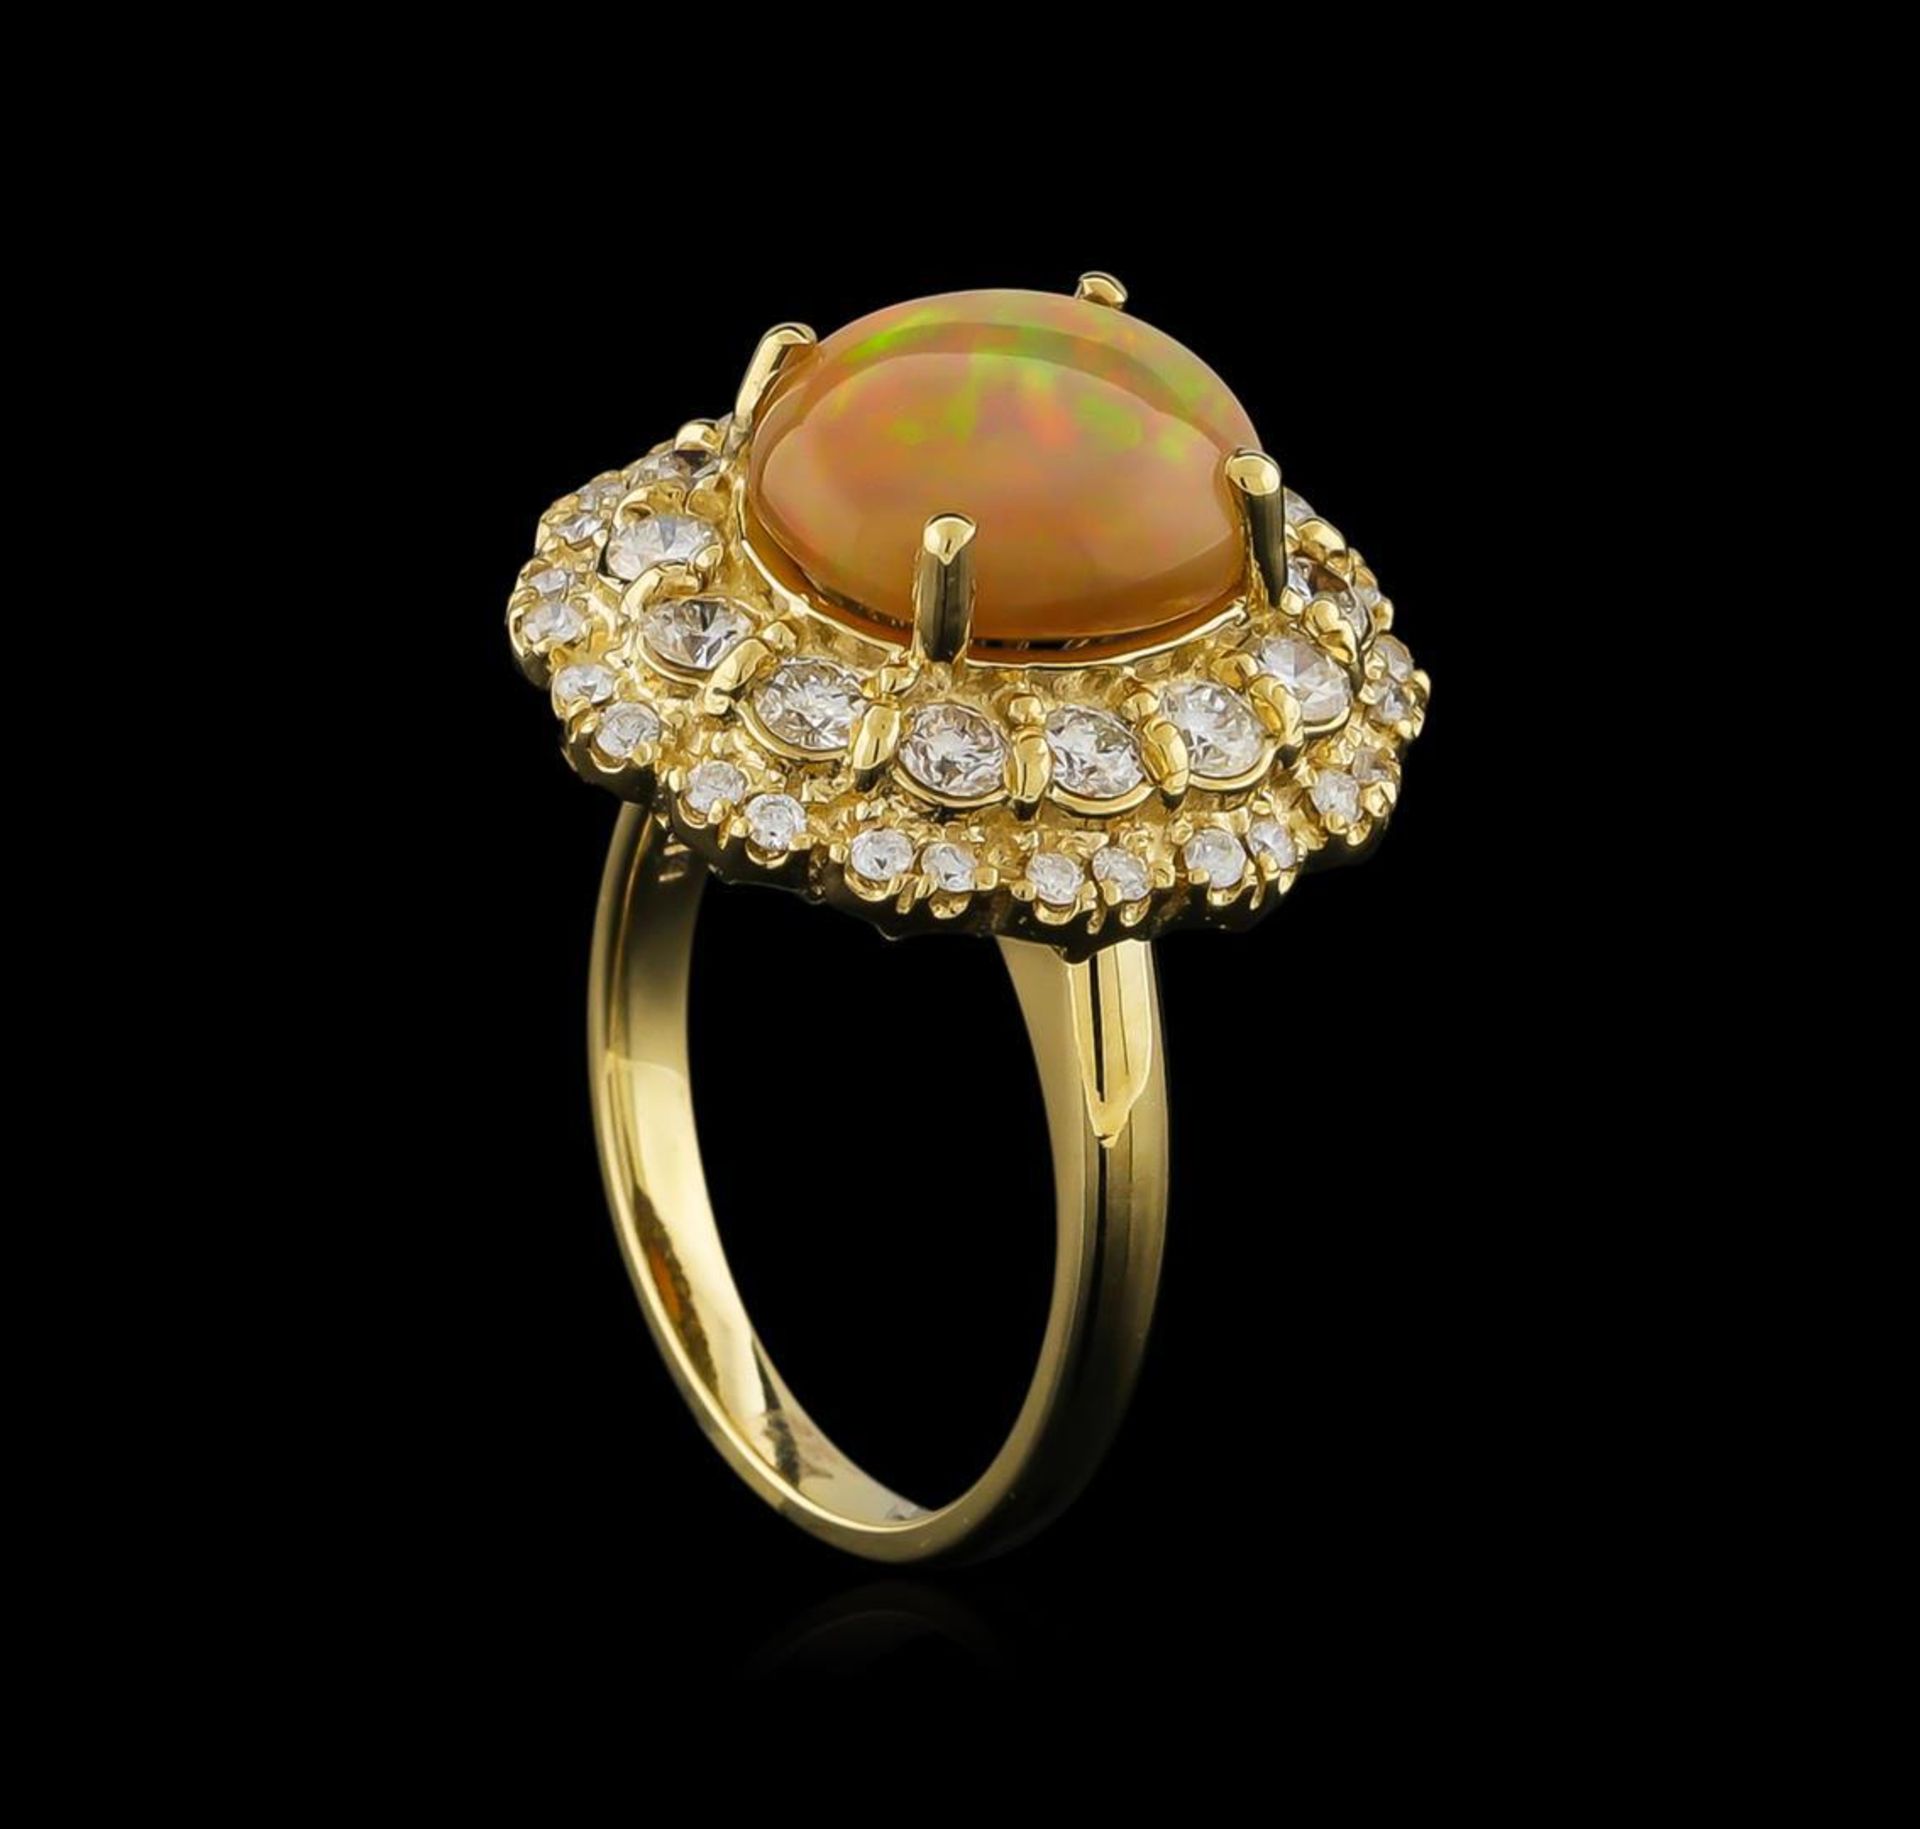 2.75 ctw Opal and Diamond Ring - 14KT Yellow Gold - Image 4 of 5